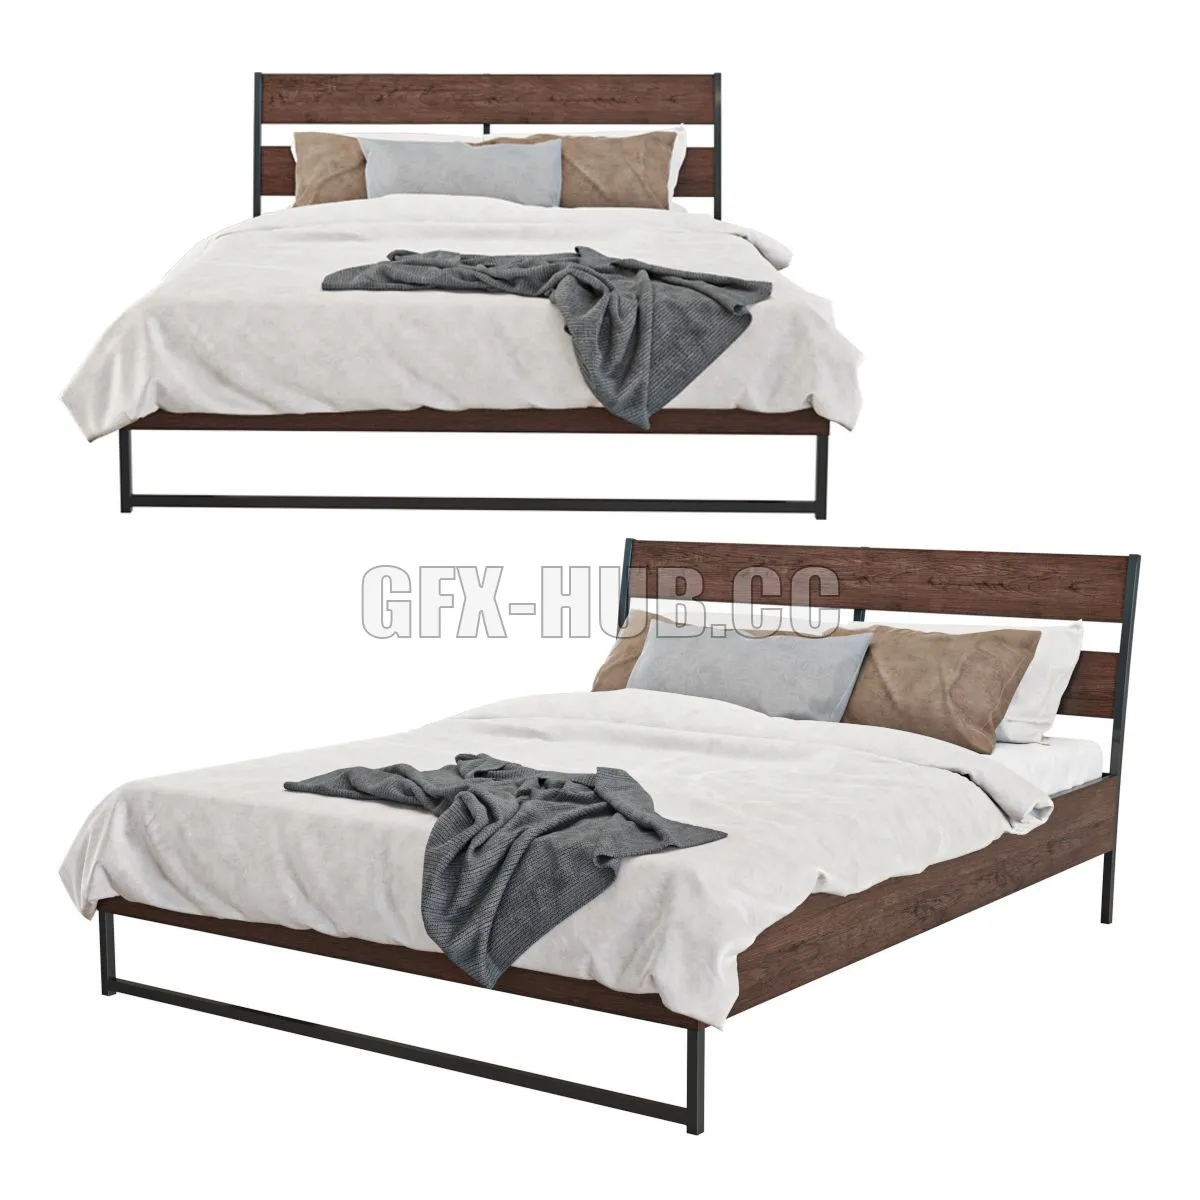 IKEA BED TRYSIL – 216767